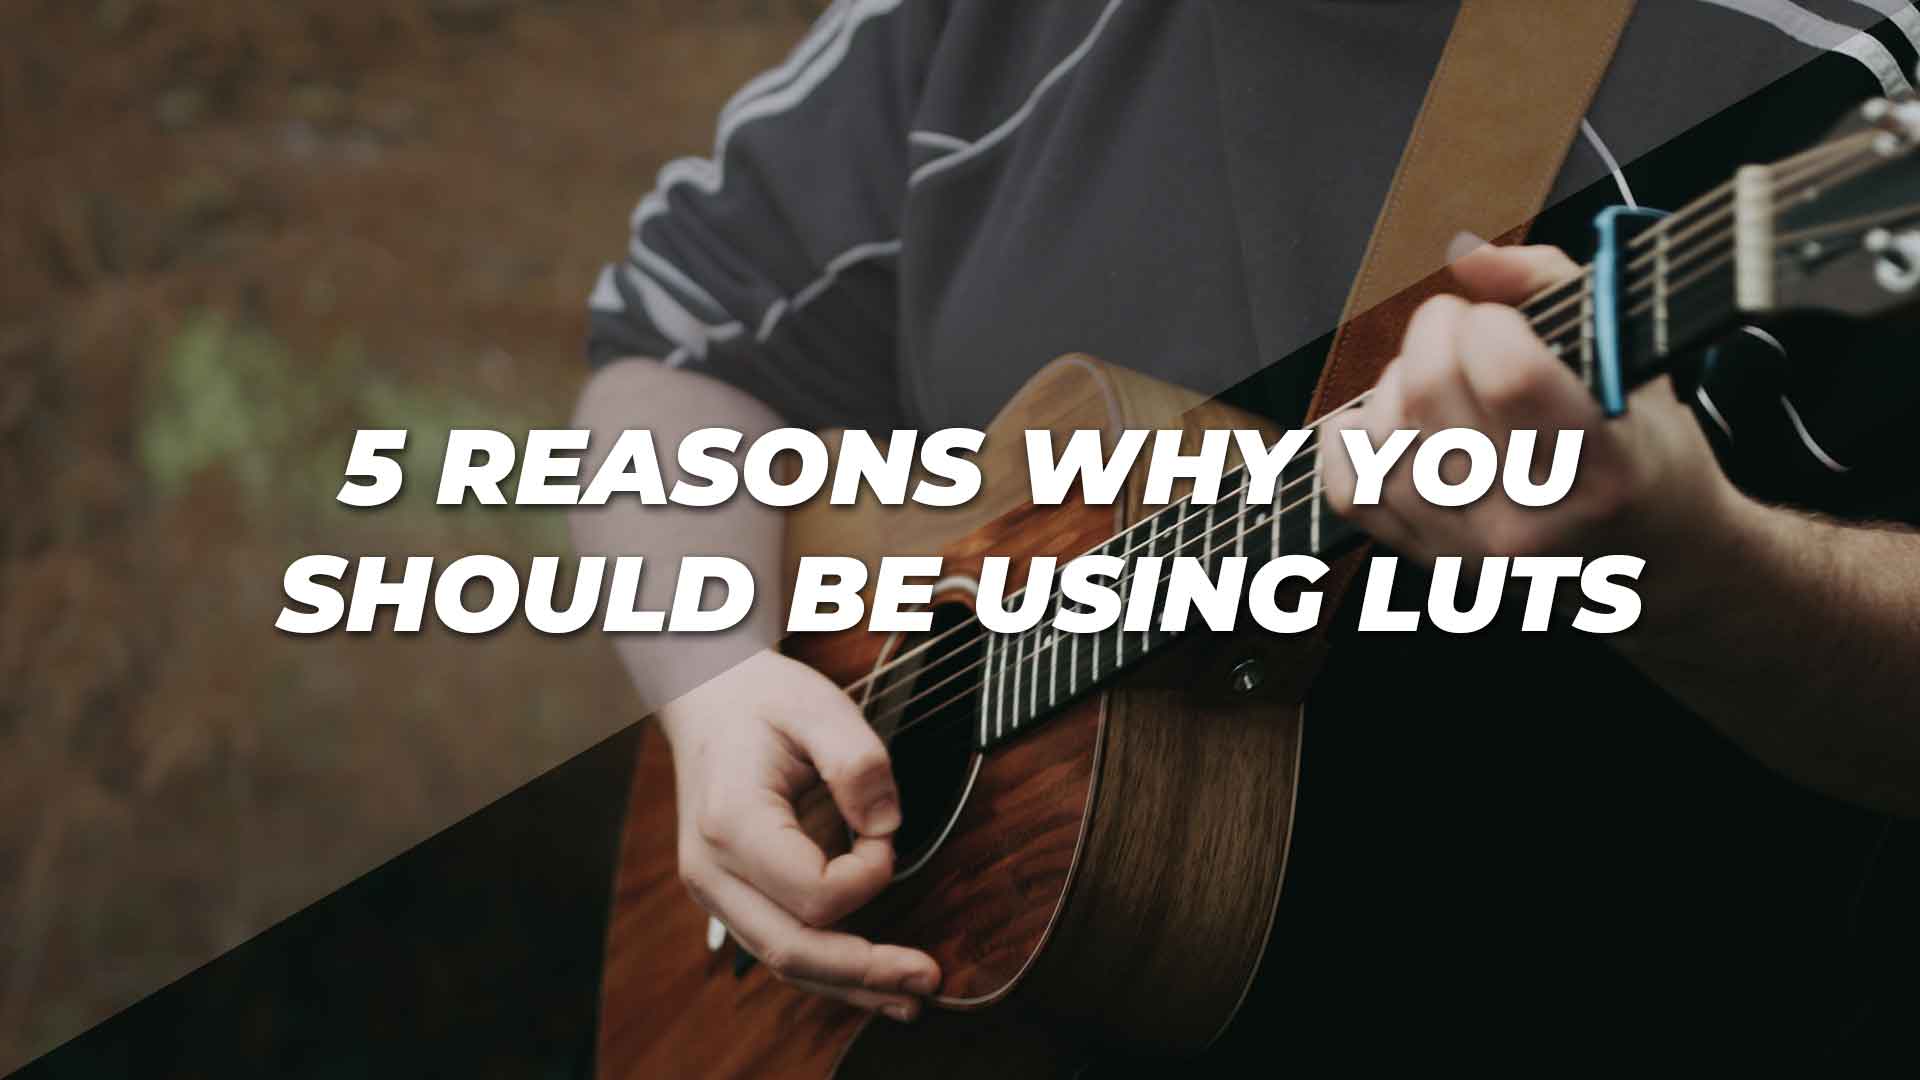 5 Reasons Why You Should Be Using LUTs